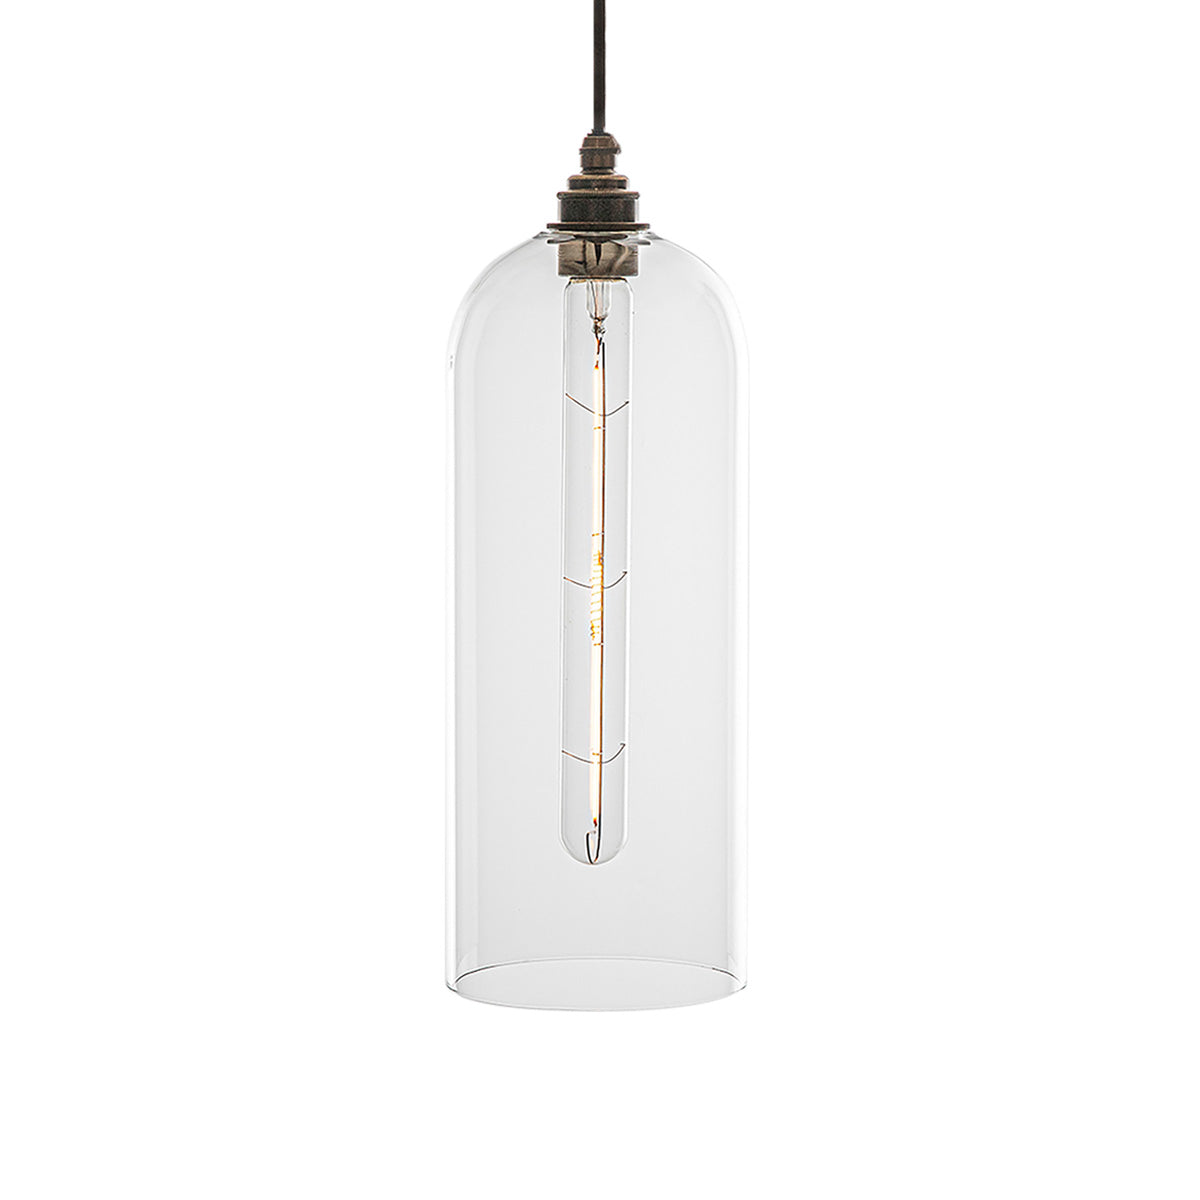 Richmond designer pendant lighting with clear glass and sold by South Charlotte Fine Lighting